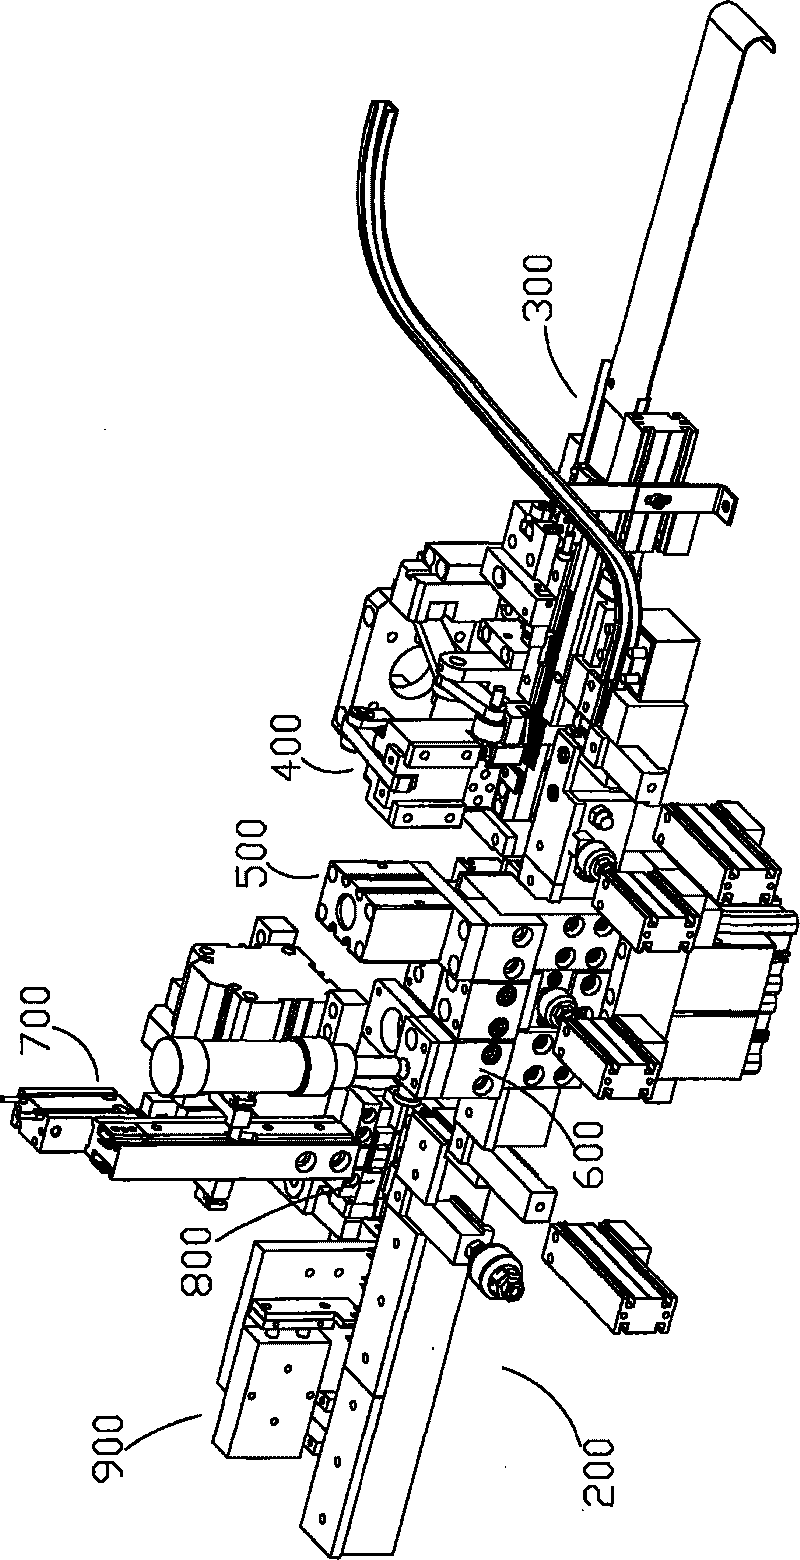 Automatic assembling machine of accurate connector